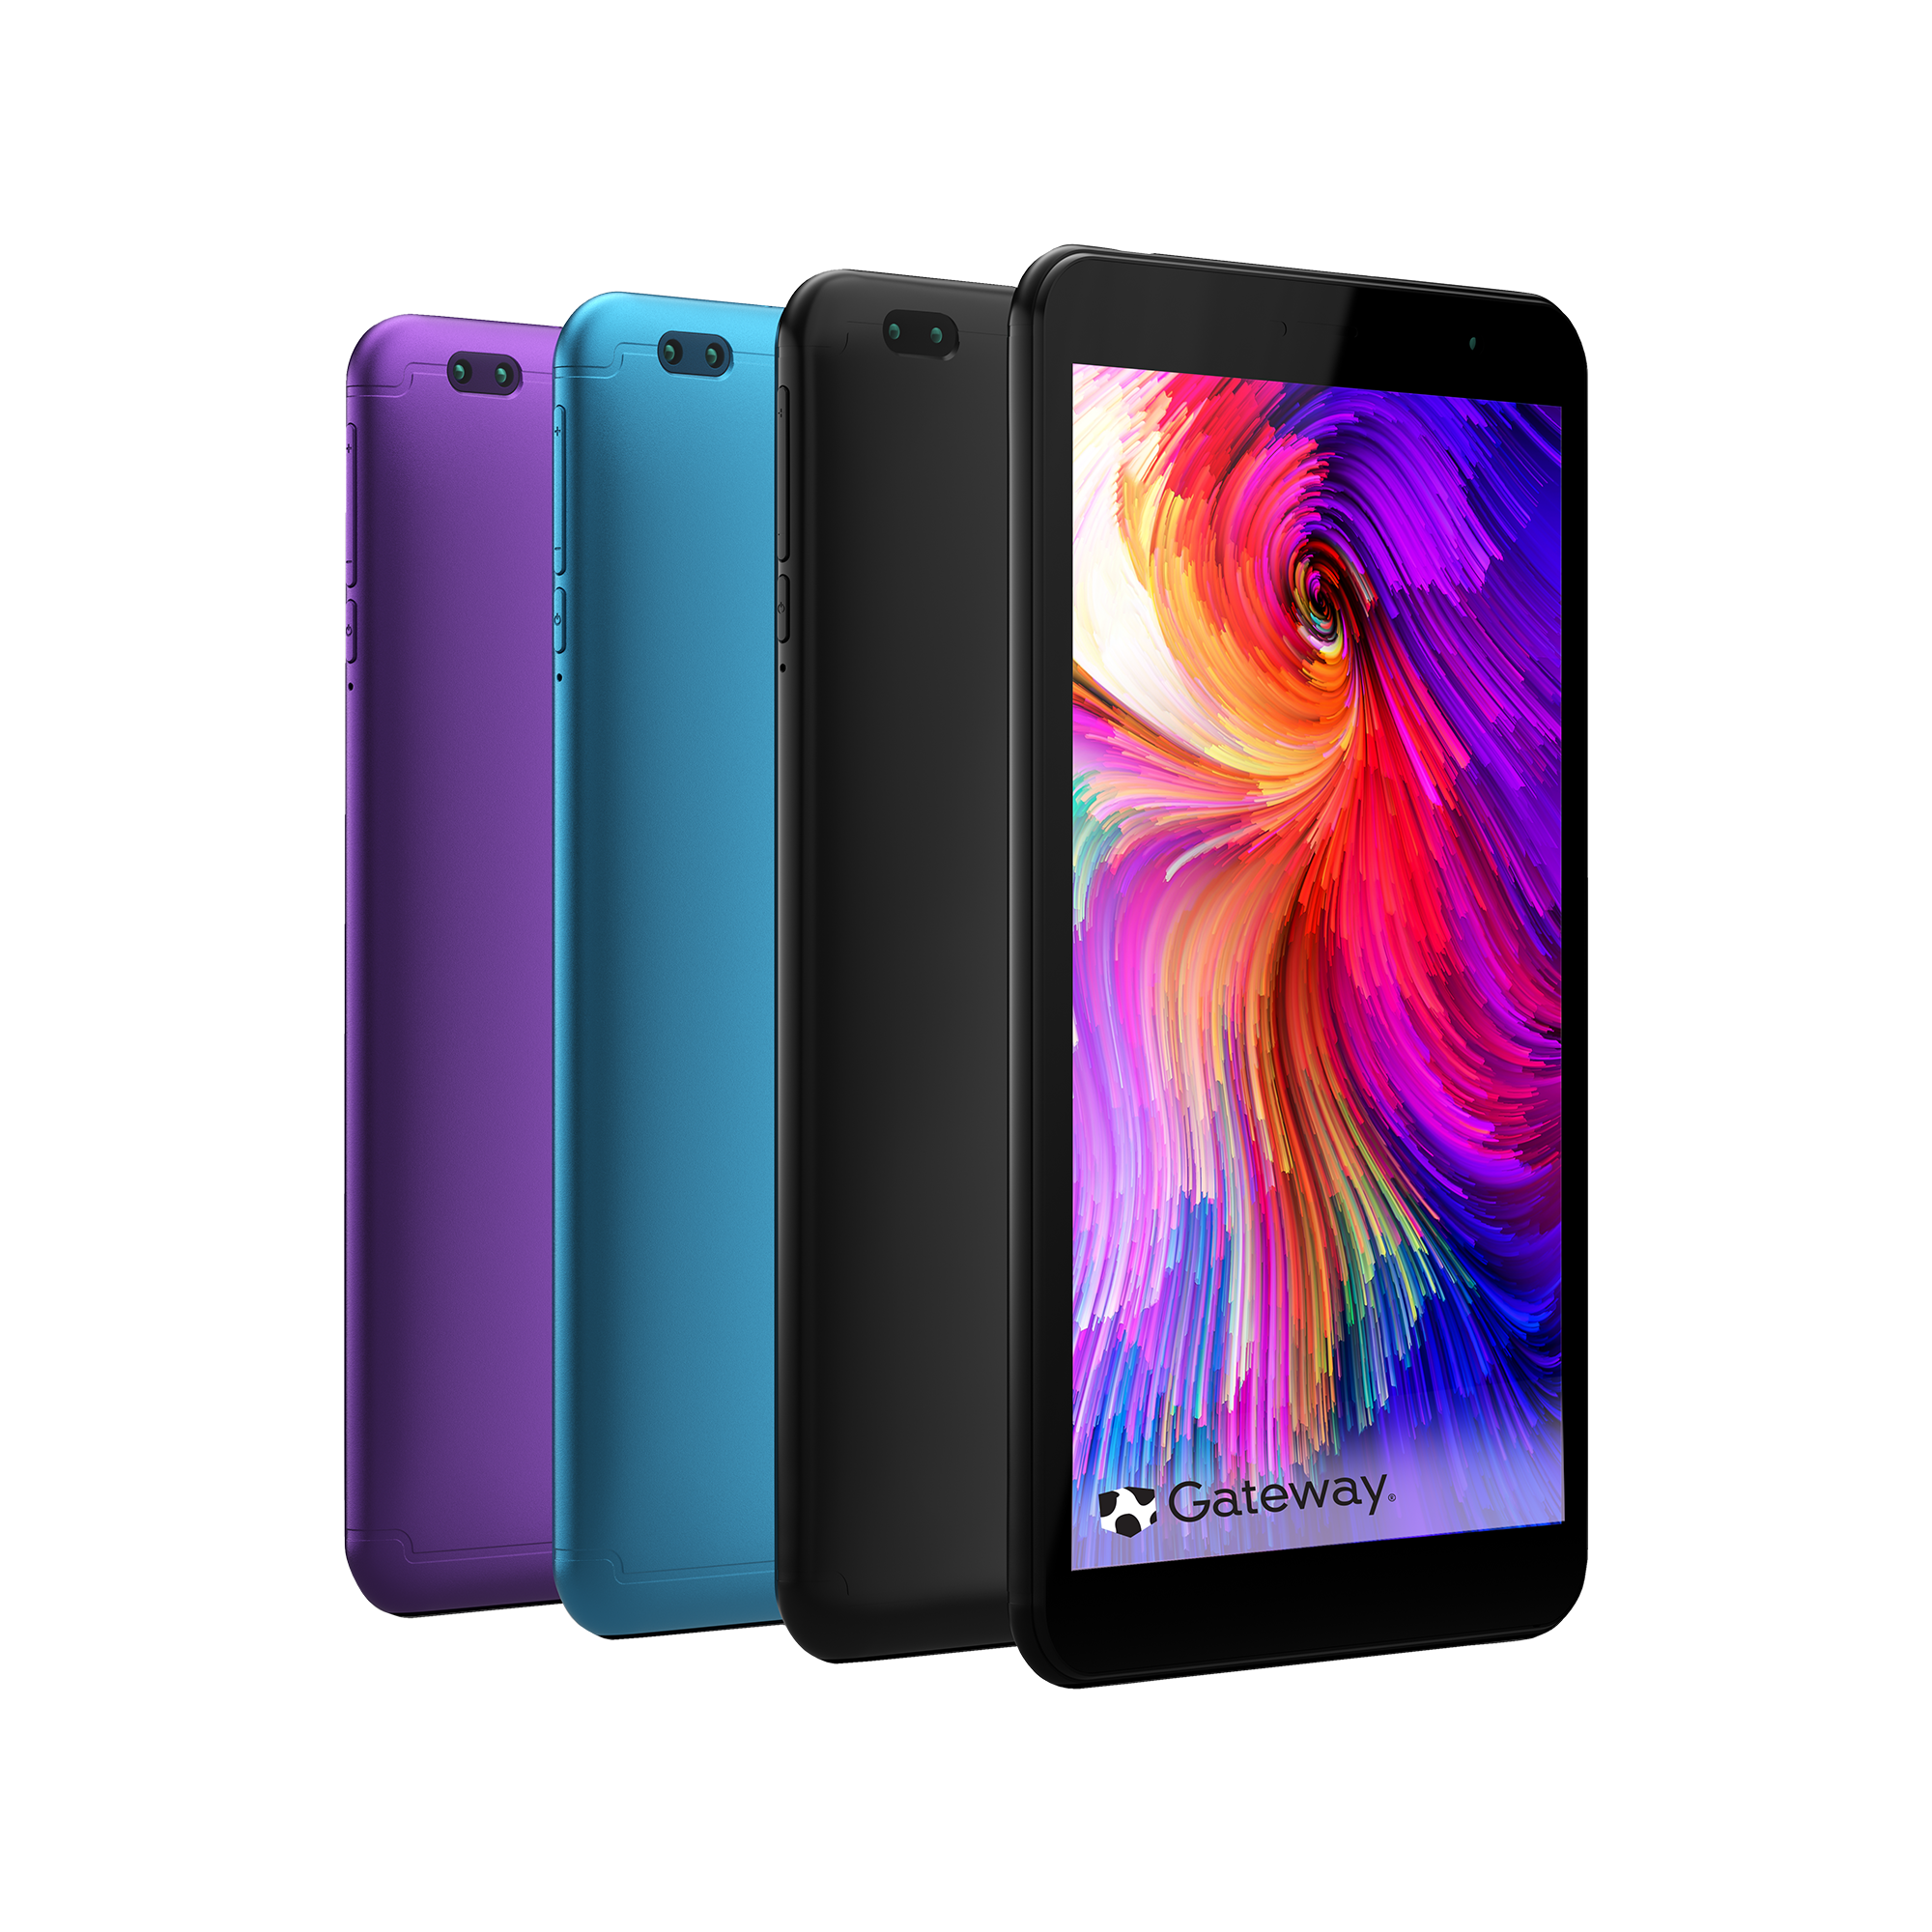 Gateway 8” Tablet, Quad Core, 32GB Storage, 2GB Memory, 0.3MP Front Camera, 2MP Rear Camera, USB-C, Sound ID, Android 10 Go Edition, Purple - image 1 of 5